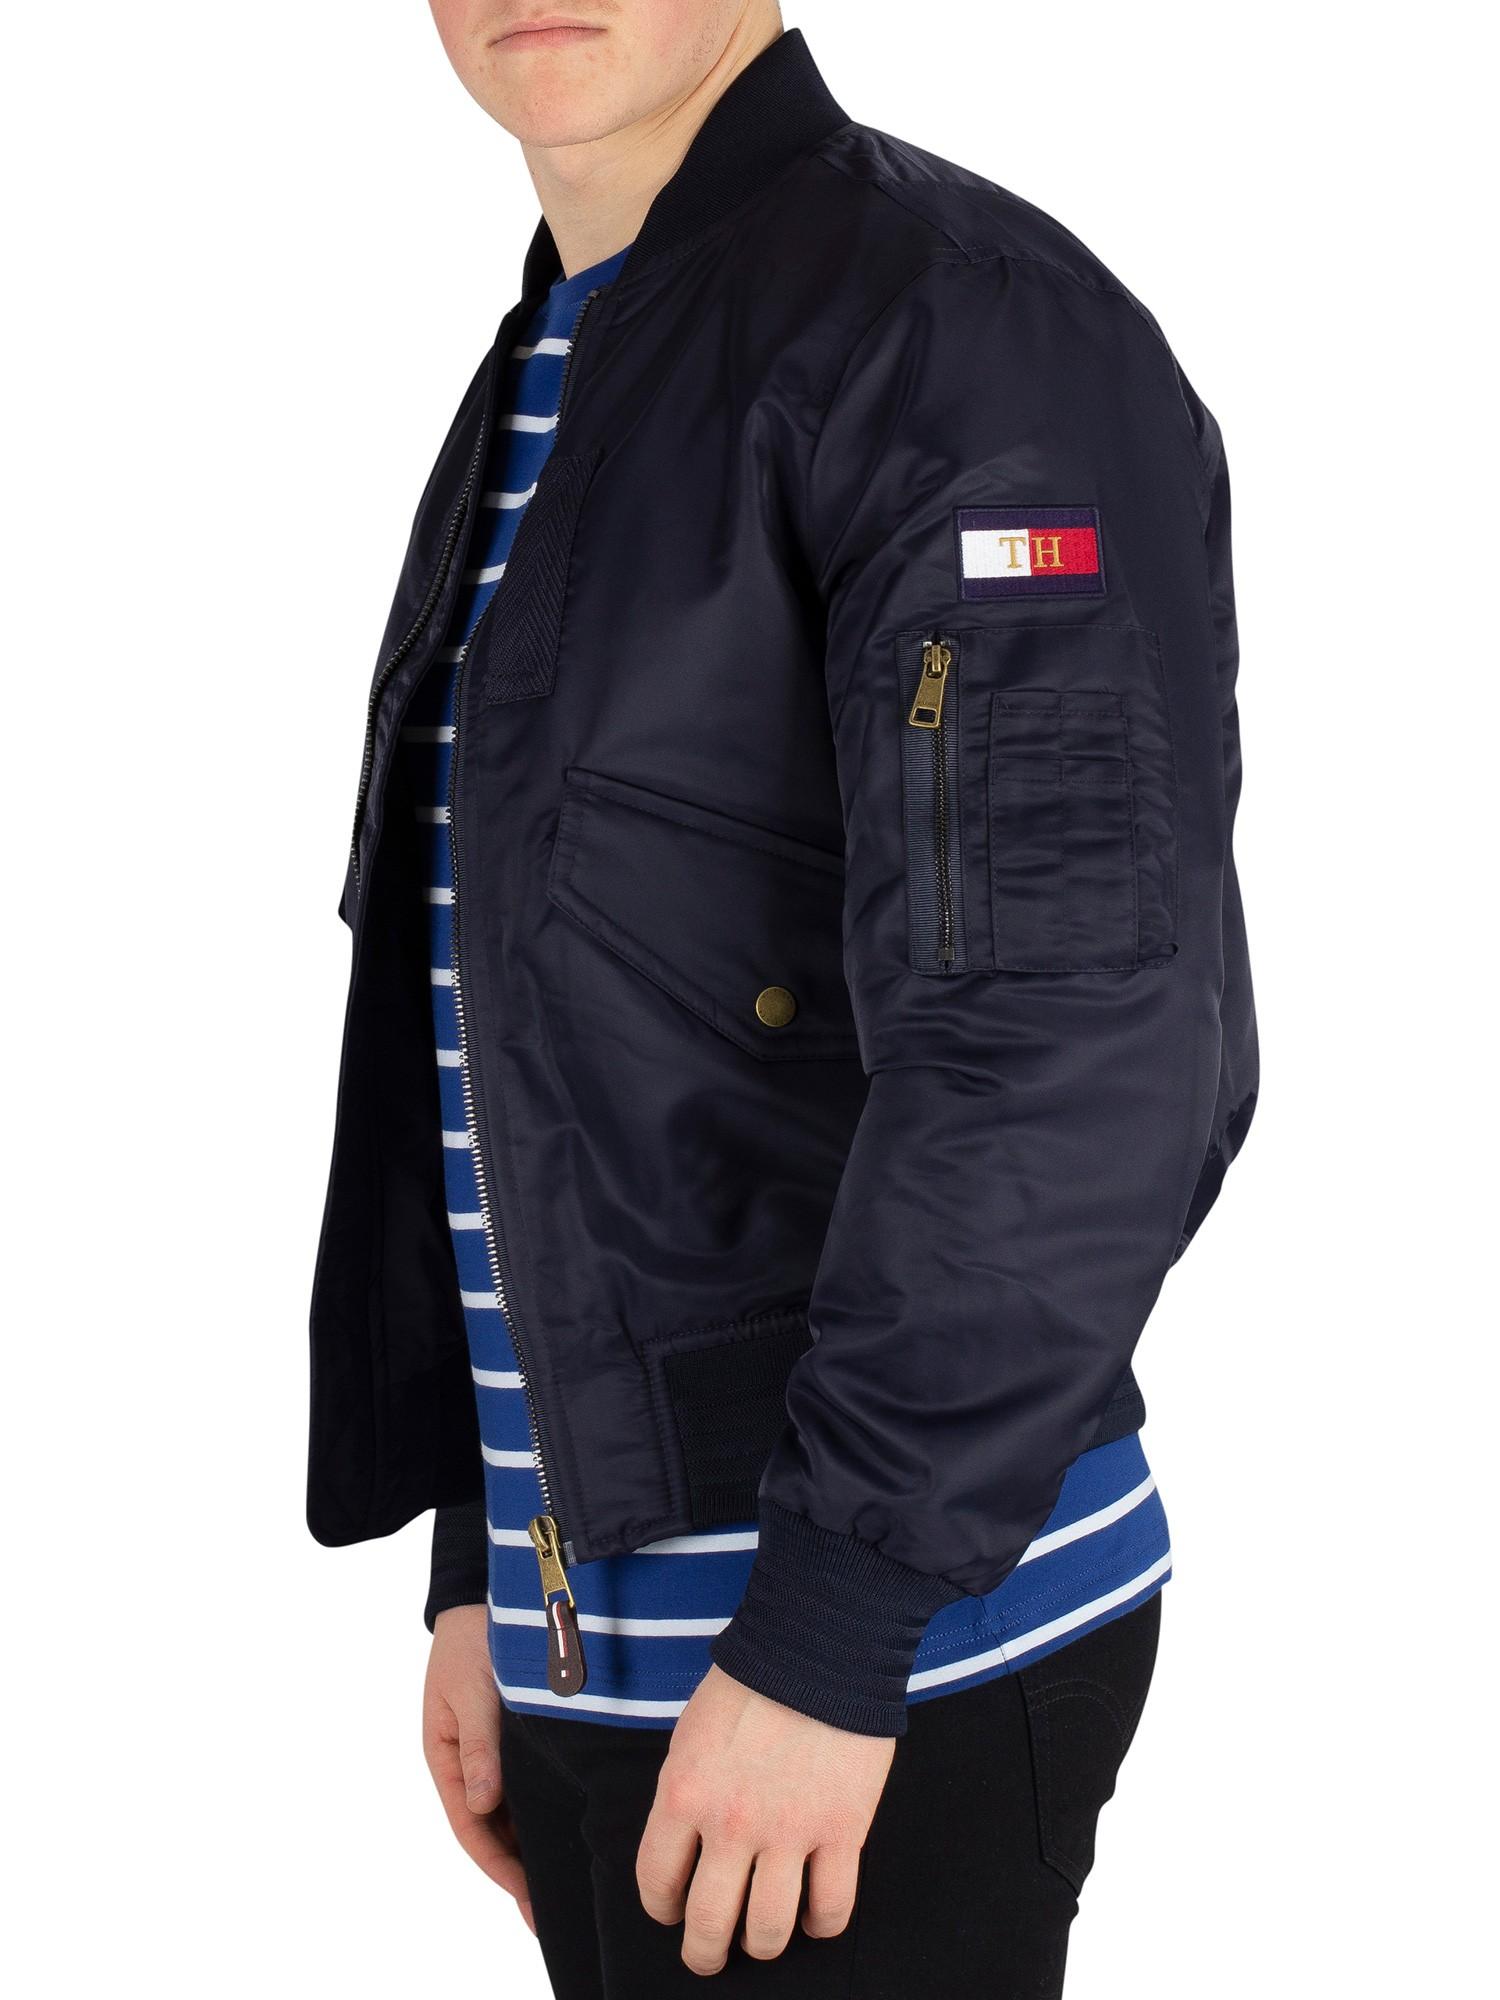 tommy hilfiger icon harrington jacket Cheaper Than Retail Price> Buy  Clothing, Accessories and lifestyle products for women & men -